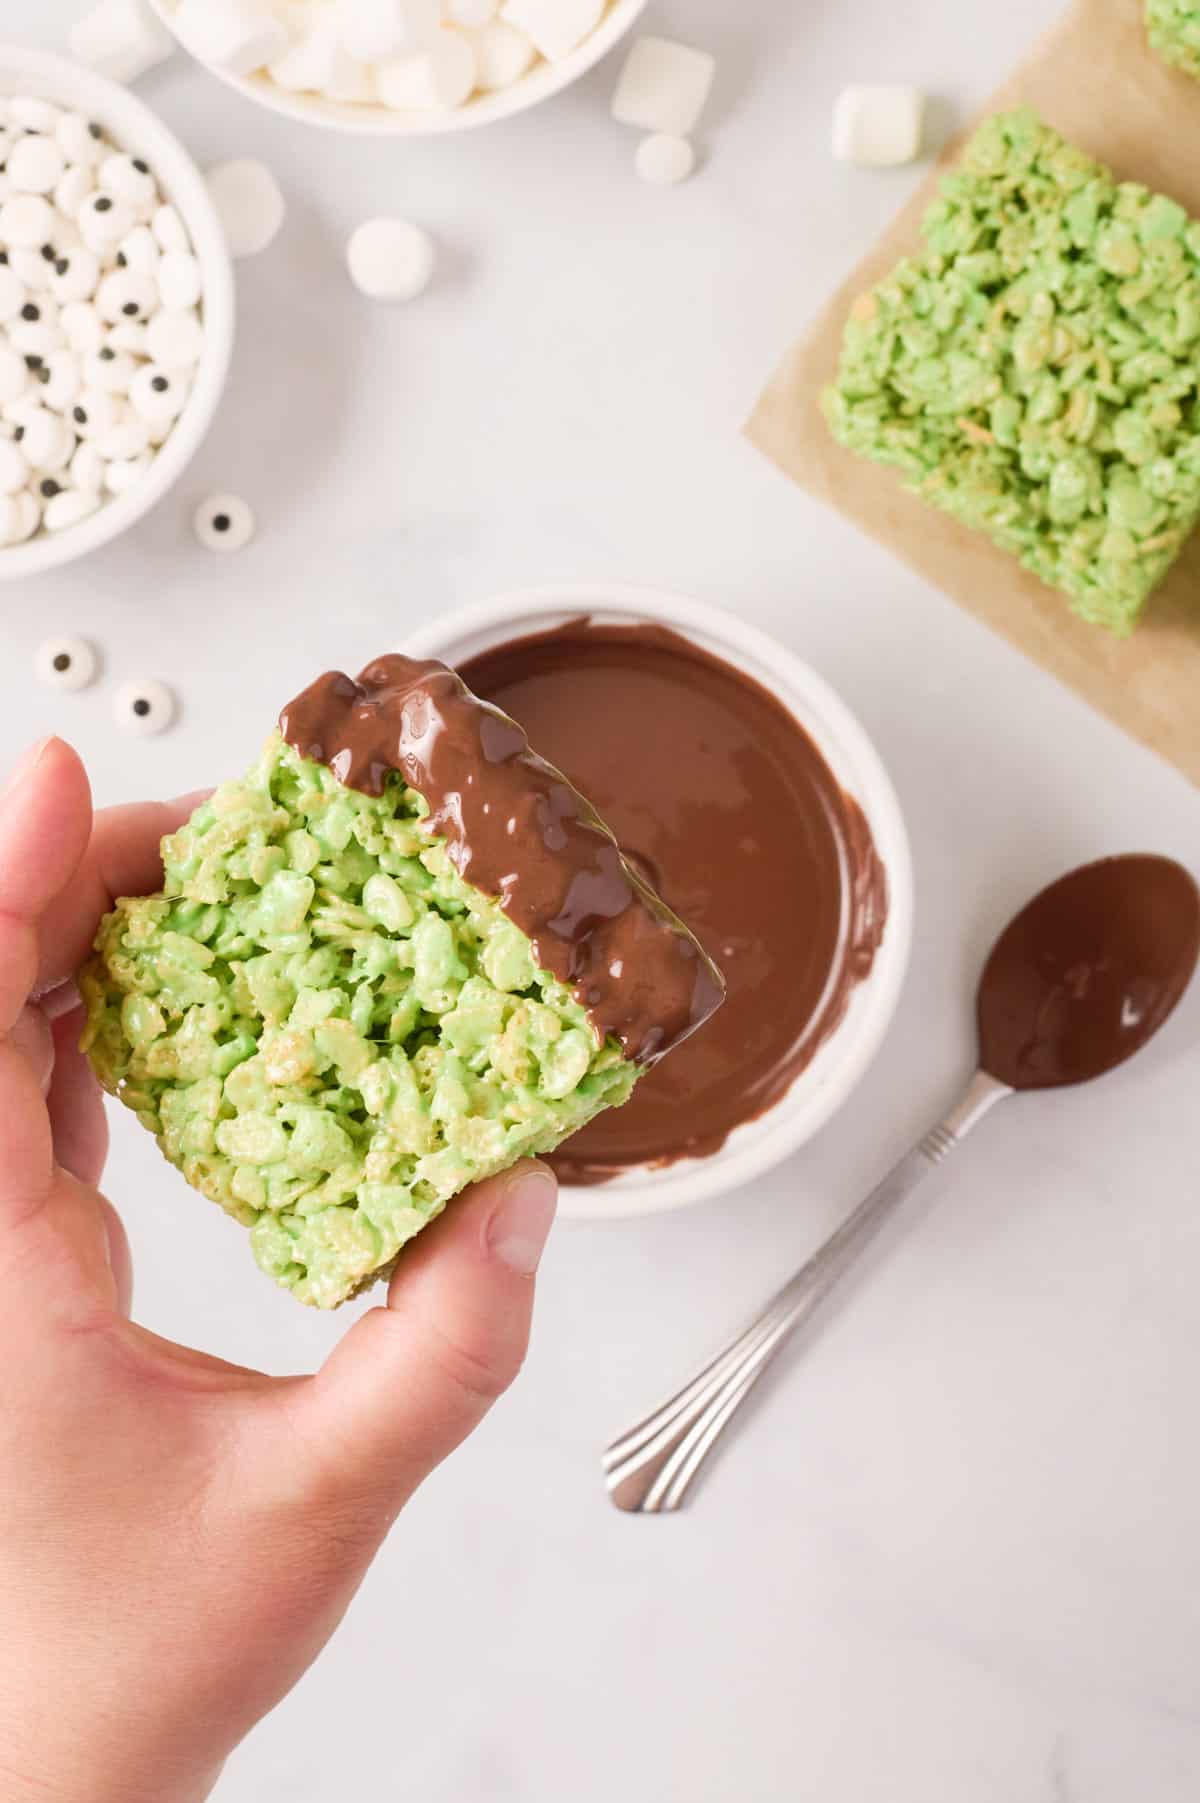 Green treat being dipped in bowl of melted chocolate.